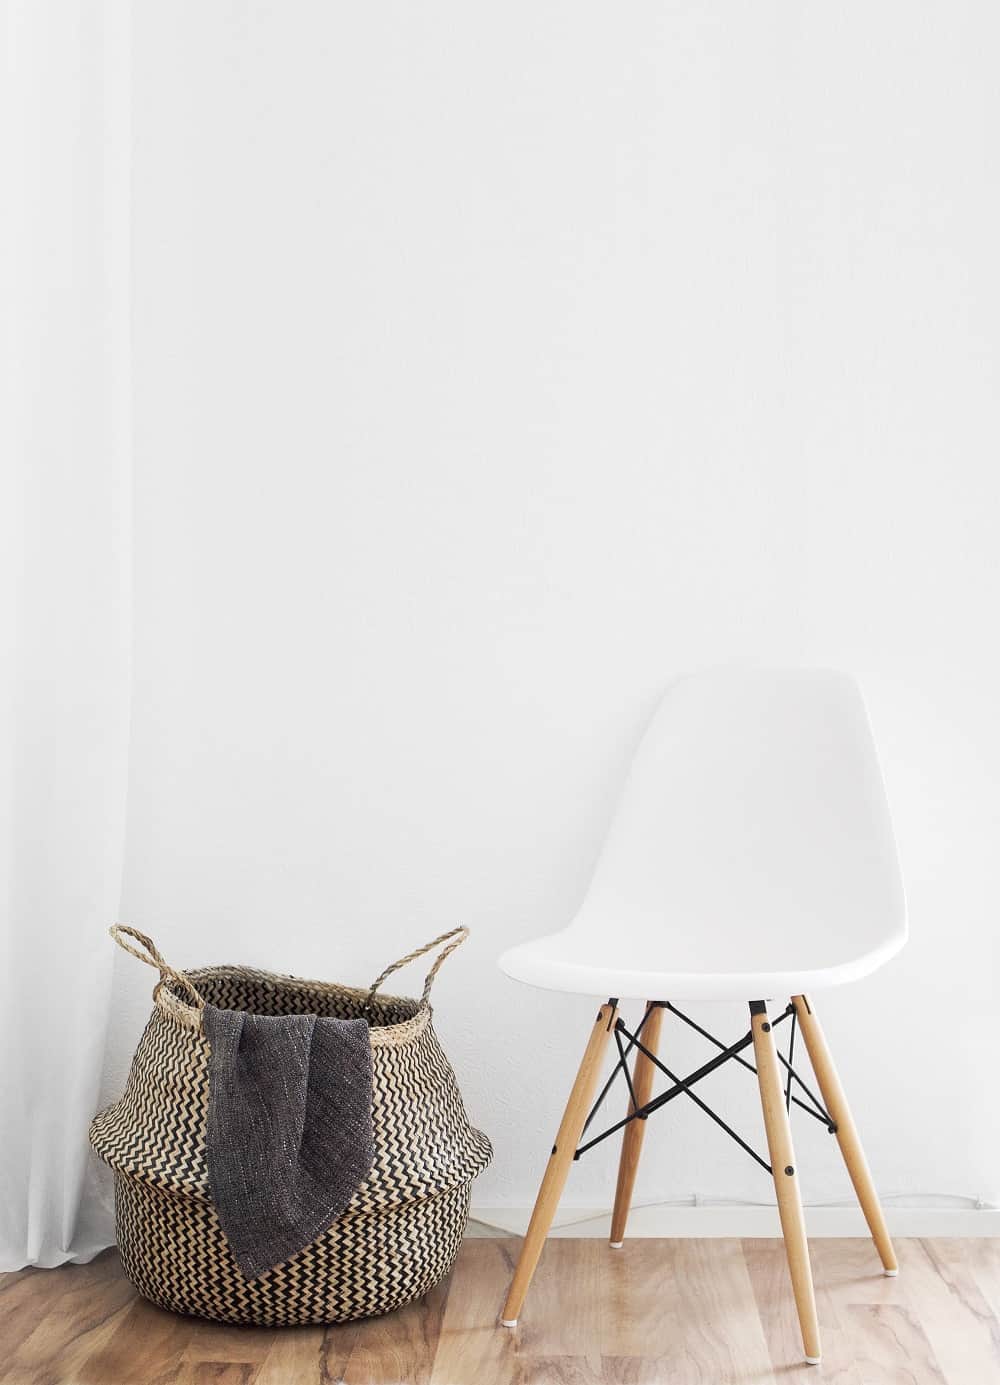 Chair and basket